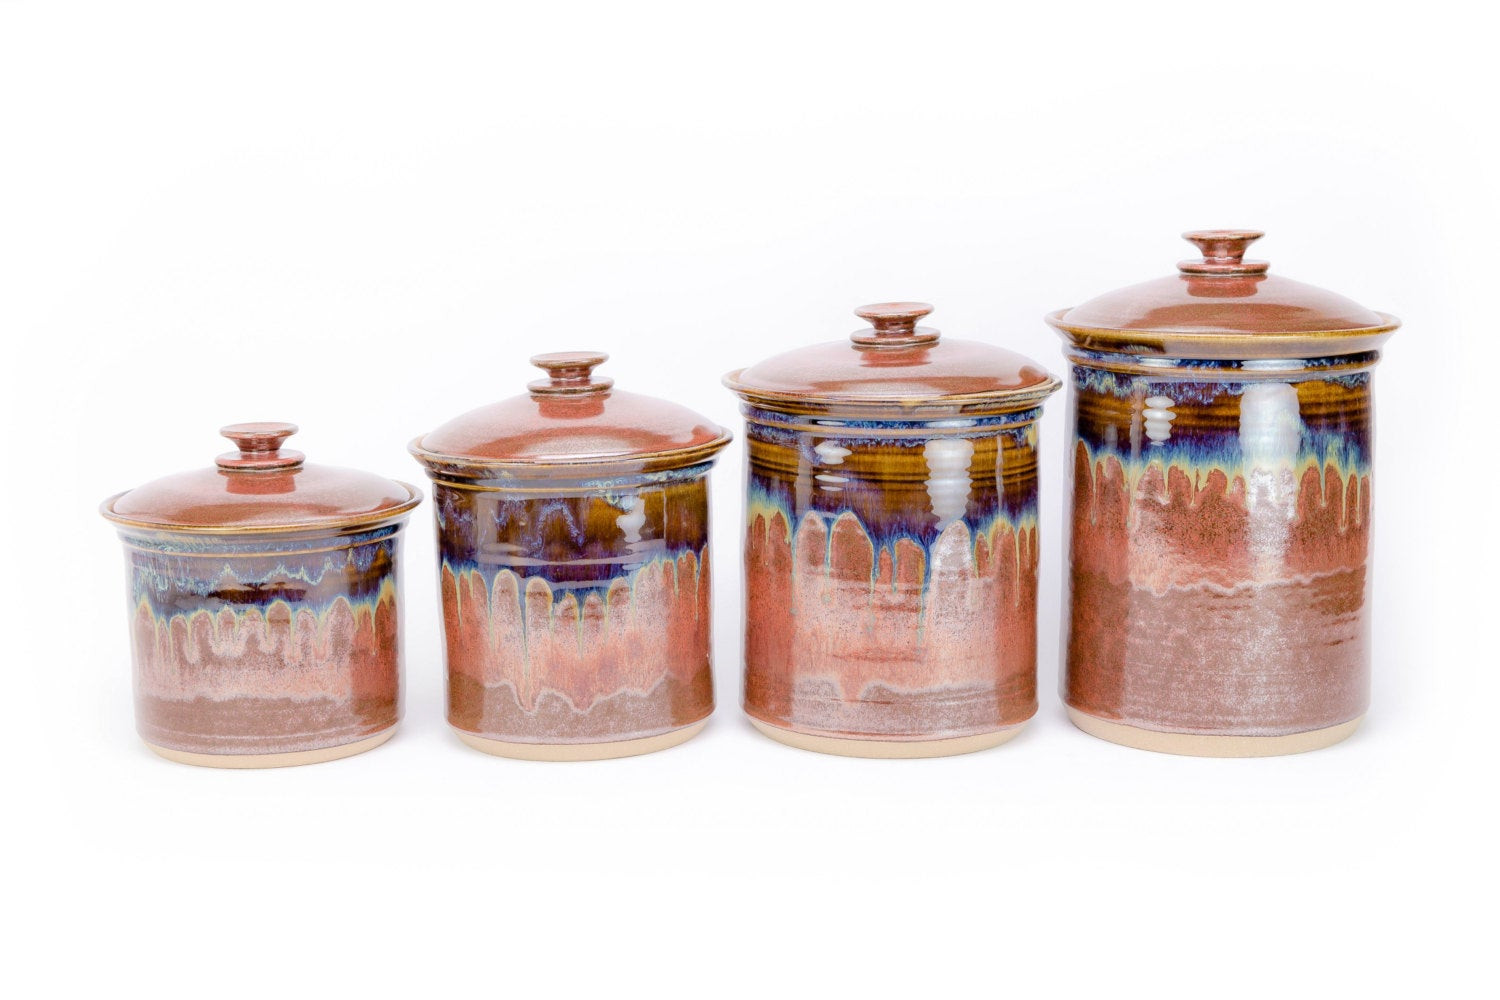 Rustic Kitchen Canister Sets
 4 piece hand thrown pottery canister Set in Rustic Glaze